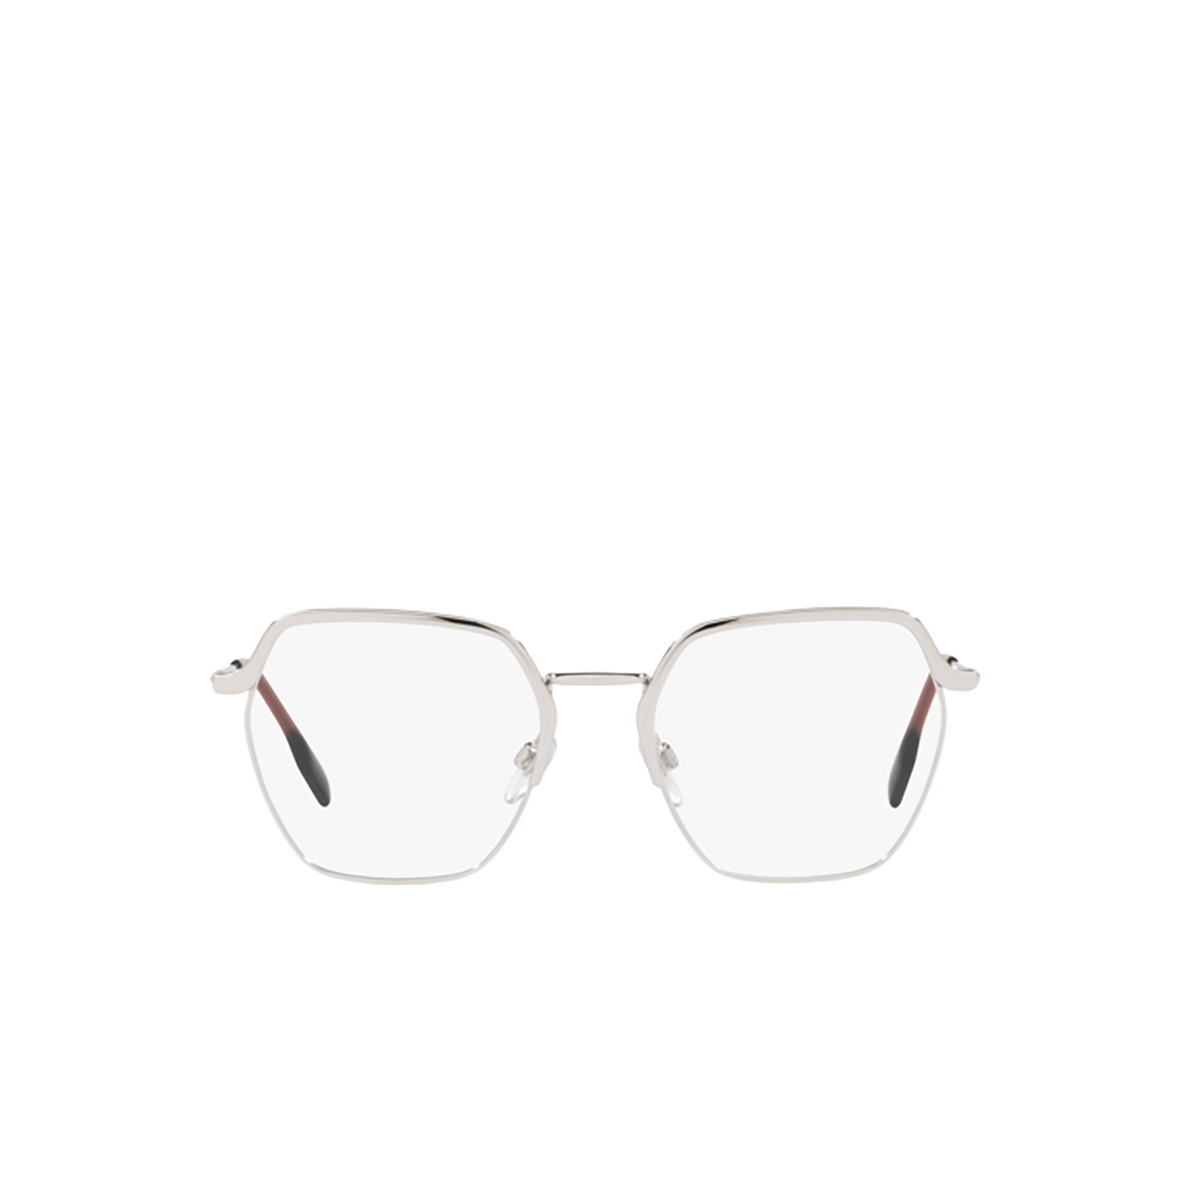 Burberry ANGELICA Eyeglasses 1005 Silver - front view